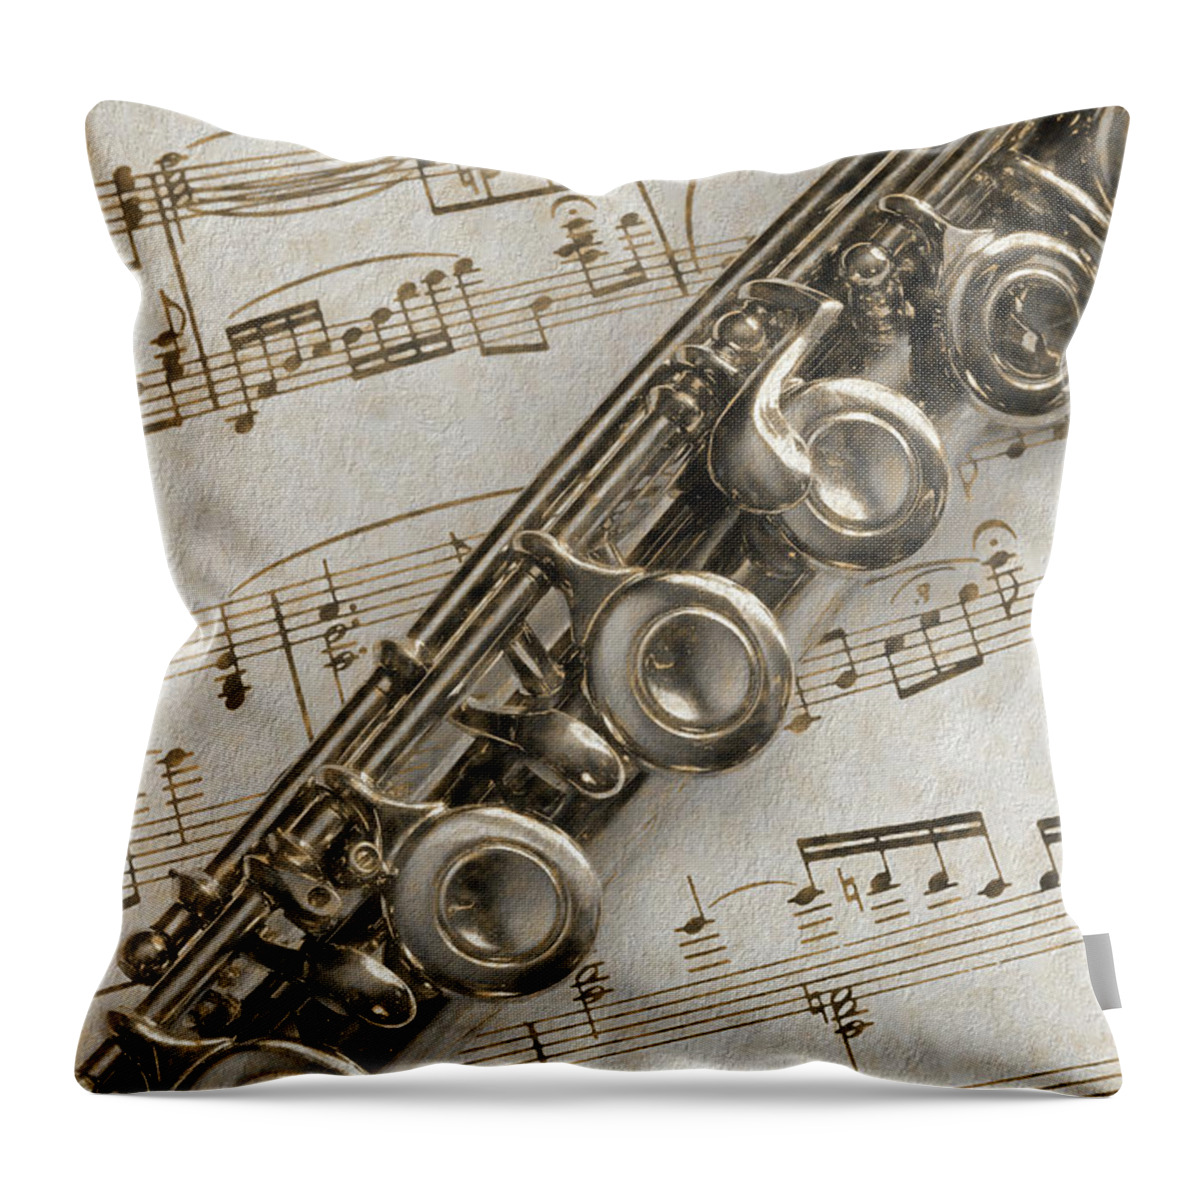 Flute Throw Pillow featuring the photograph My Flute Photo Sketch by Mary Bedy